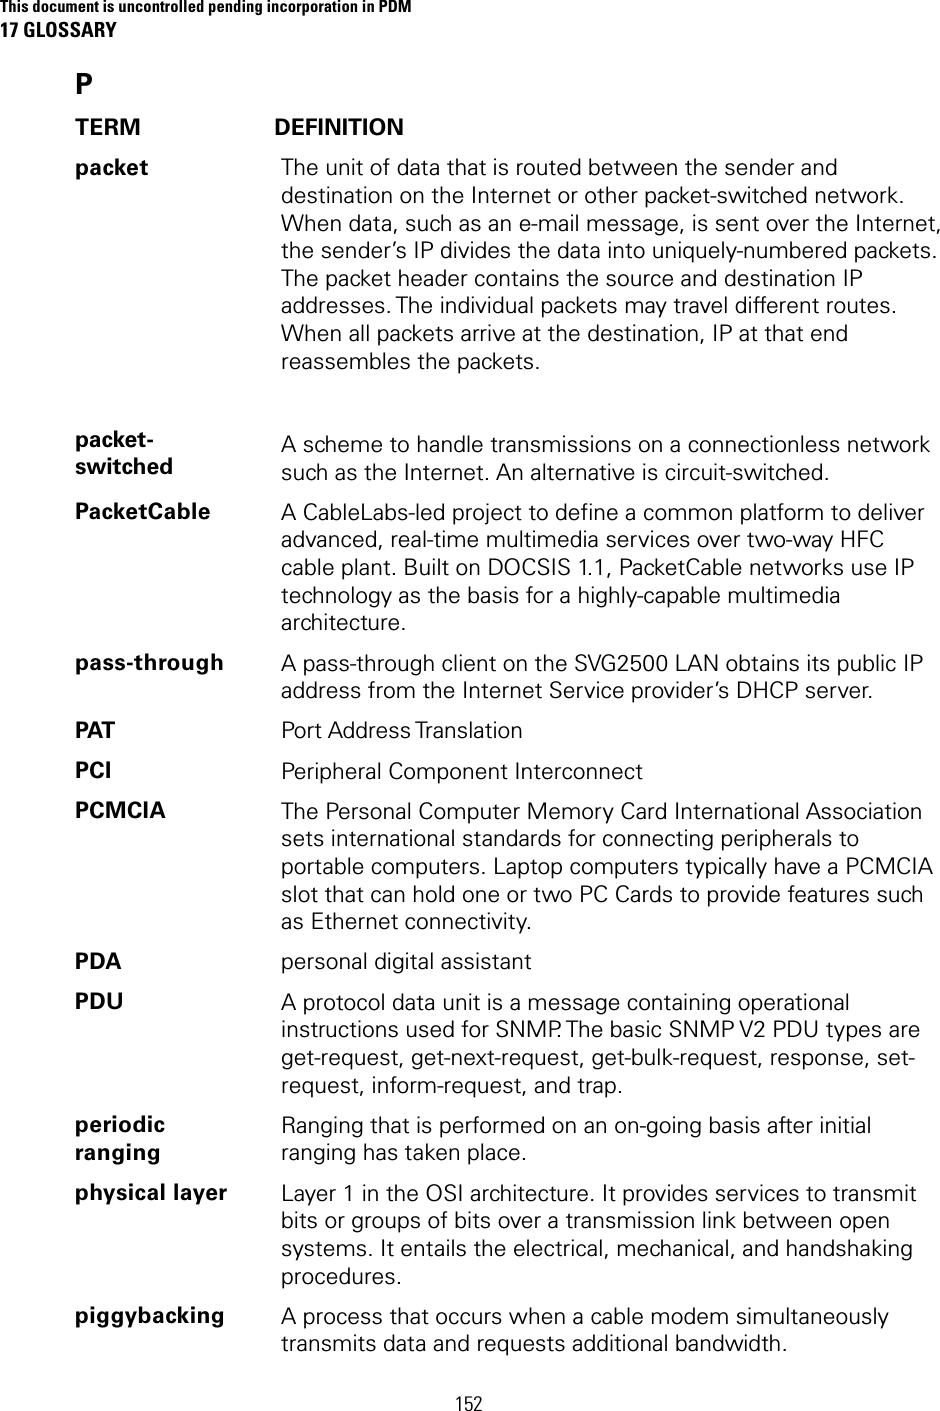 This document is uncontrolled pending incorporation in PDM 17 GLOSSARY 152 P TERM DEFINITION packet          packet-switched The unit of data that is routed between the sender and destination on the Internet or other packet-switched network. When data, such as an e-mail message, is sent over the Internet, the sender’s IP divides the data into uniquely-numbered packets. The packet header contains the source and destination IP addresses. The individual packets may travel different routes. When all packets arrive at the destination, IP at that end reassembles the packets.    A scheme to handle transmissions on a connectionless network such as the Internet. An alternative is circuit-switched. PacketCable  A CableLabs-led project to define a common platform to deliver advanced, real-time multimedia services over two-way HFC cable plant. Built on DOCSIS 1.1, PacketCable networks use IP technology as the basis for a highly-capable multimedia architecture. pass-through  A pass-through client on the SVG2500 LAN obtains its public IP address from the Internet Service provider’s DHCP server. PAT  Port Address Translation PCI  Peripheral Component Interconnect PCMCIA  The Personal Computer Memory Card International Association sets international standards for connecting peripherals to portable computers. Laptop computers typically have a PCMCIA slot that can hold one or two PC Cards to provide features such as Ethernet connectivity. PDA  personal digital assistant PDU  A protocol data unit is a message containing operational instructions used for SNMP. The basic SNMP V2 PDU types are get-request, get-next-request, get-bulk-request, response, set-request, inform-request, and trap. periodic ranging Ranging that is performed on an on-going basis after initial ranging has taken place. physical layer  Layer 1 in the OSI architecture. It provides services to transmit bits or groups of bits over a transmission link between open systems. It entails the electrical, mechanical, and handshaking procedures. piggybacking  A process that occurs when a cable modem simultaneously transmits data and requests additional bandwidth. 